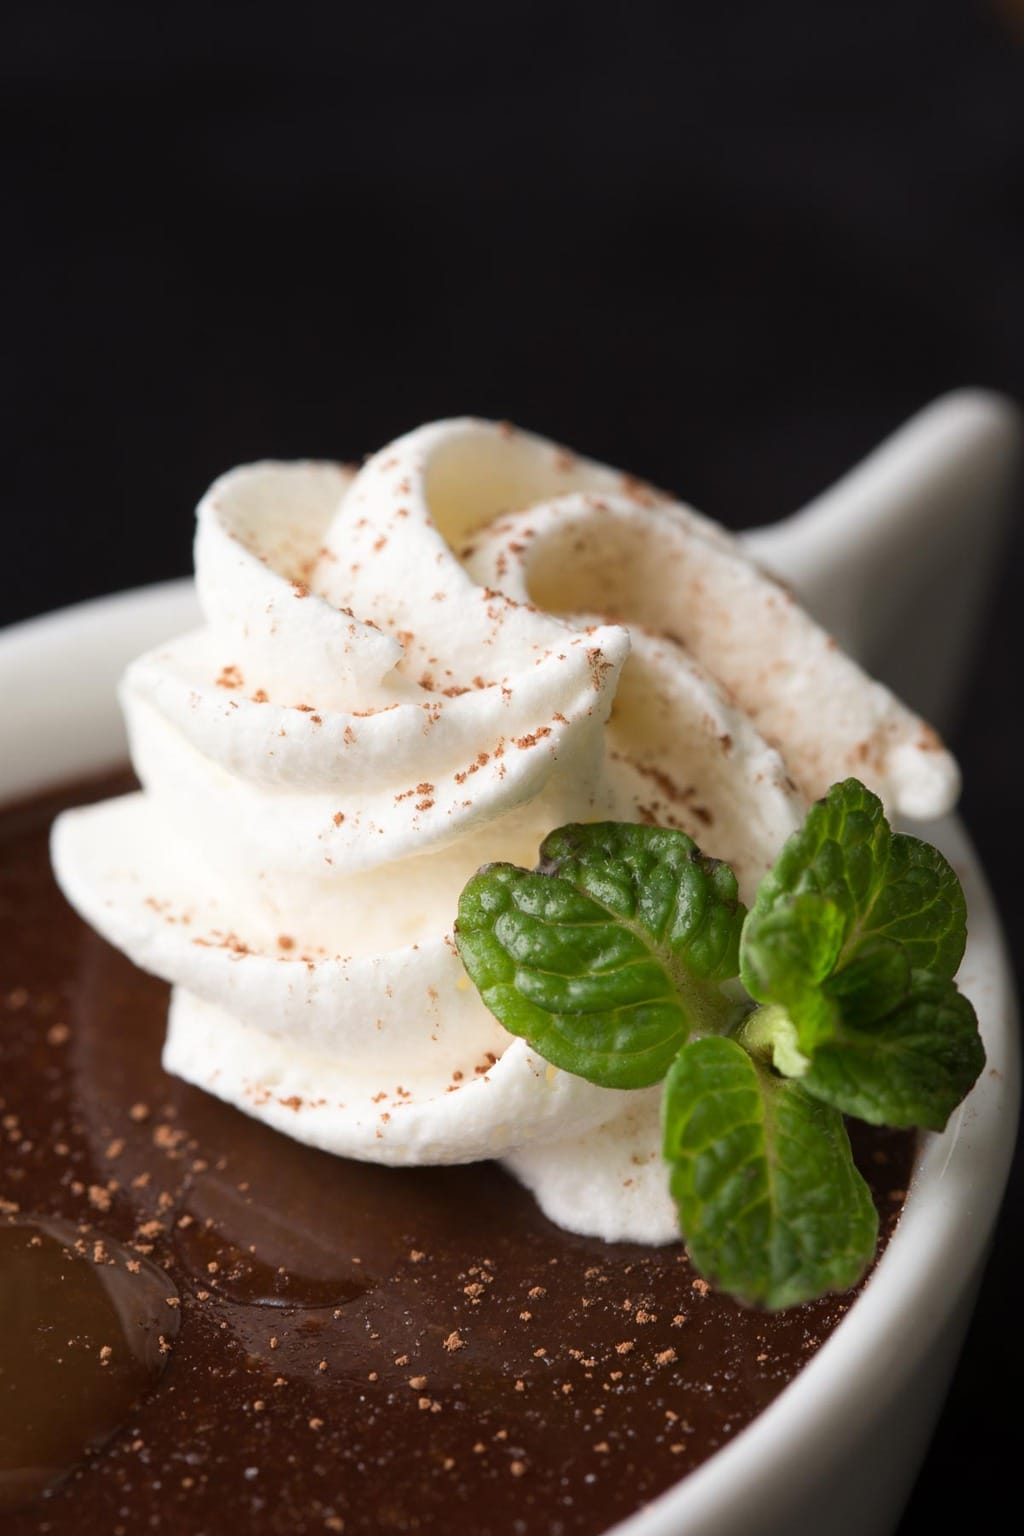 Closeup photo of a cup with Blender Chocolate Pots de Crème, garnished with whipped cream, a sprinkle of cocoa powder and a sprig of mint.